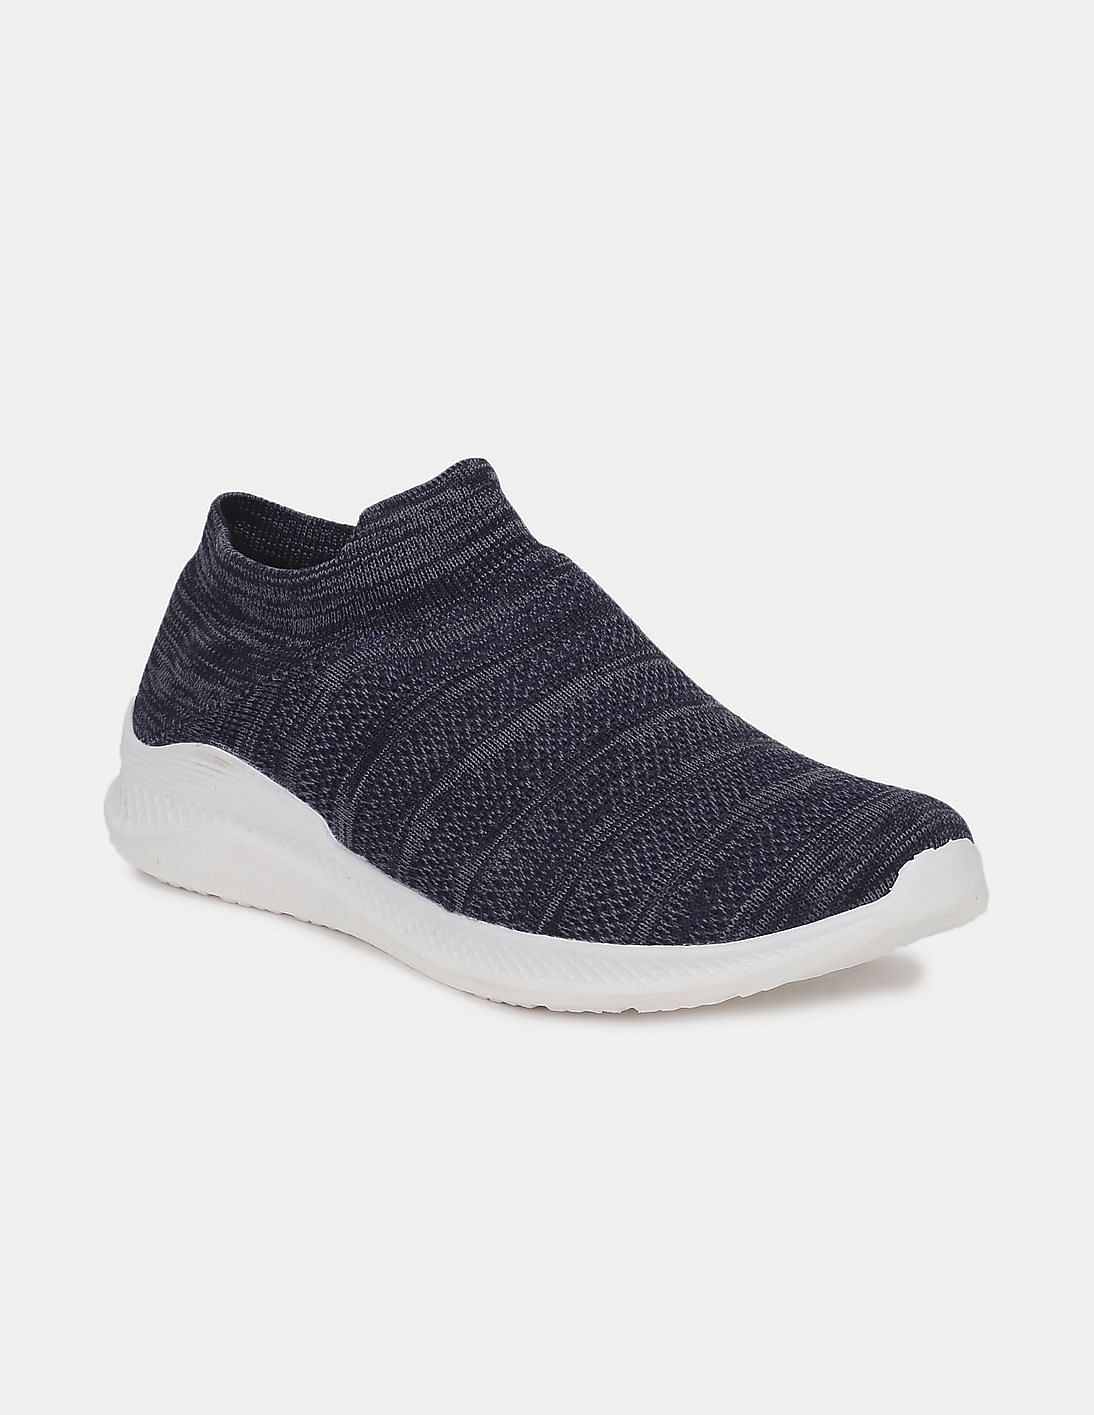 Buy Ruggers by Unlimited Men Navy Heathered Knit Slip On Shoes - NNNOW.com